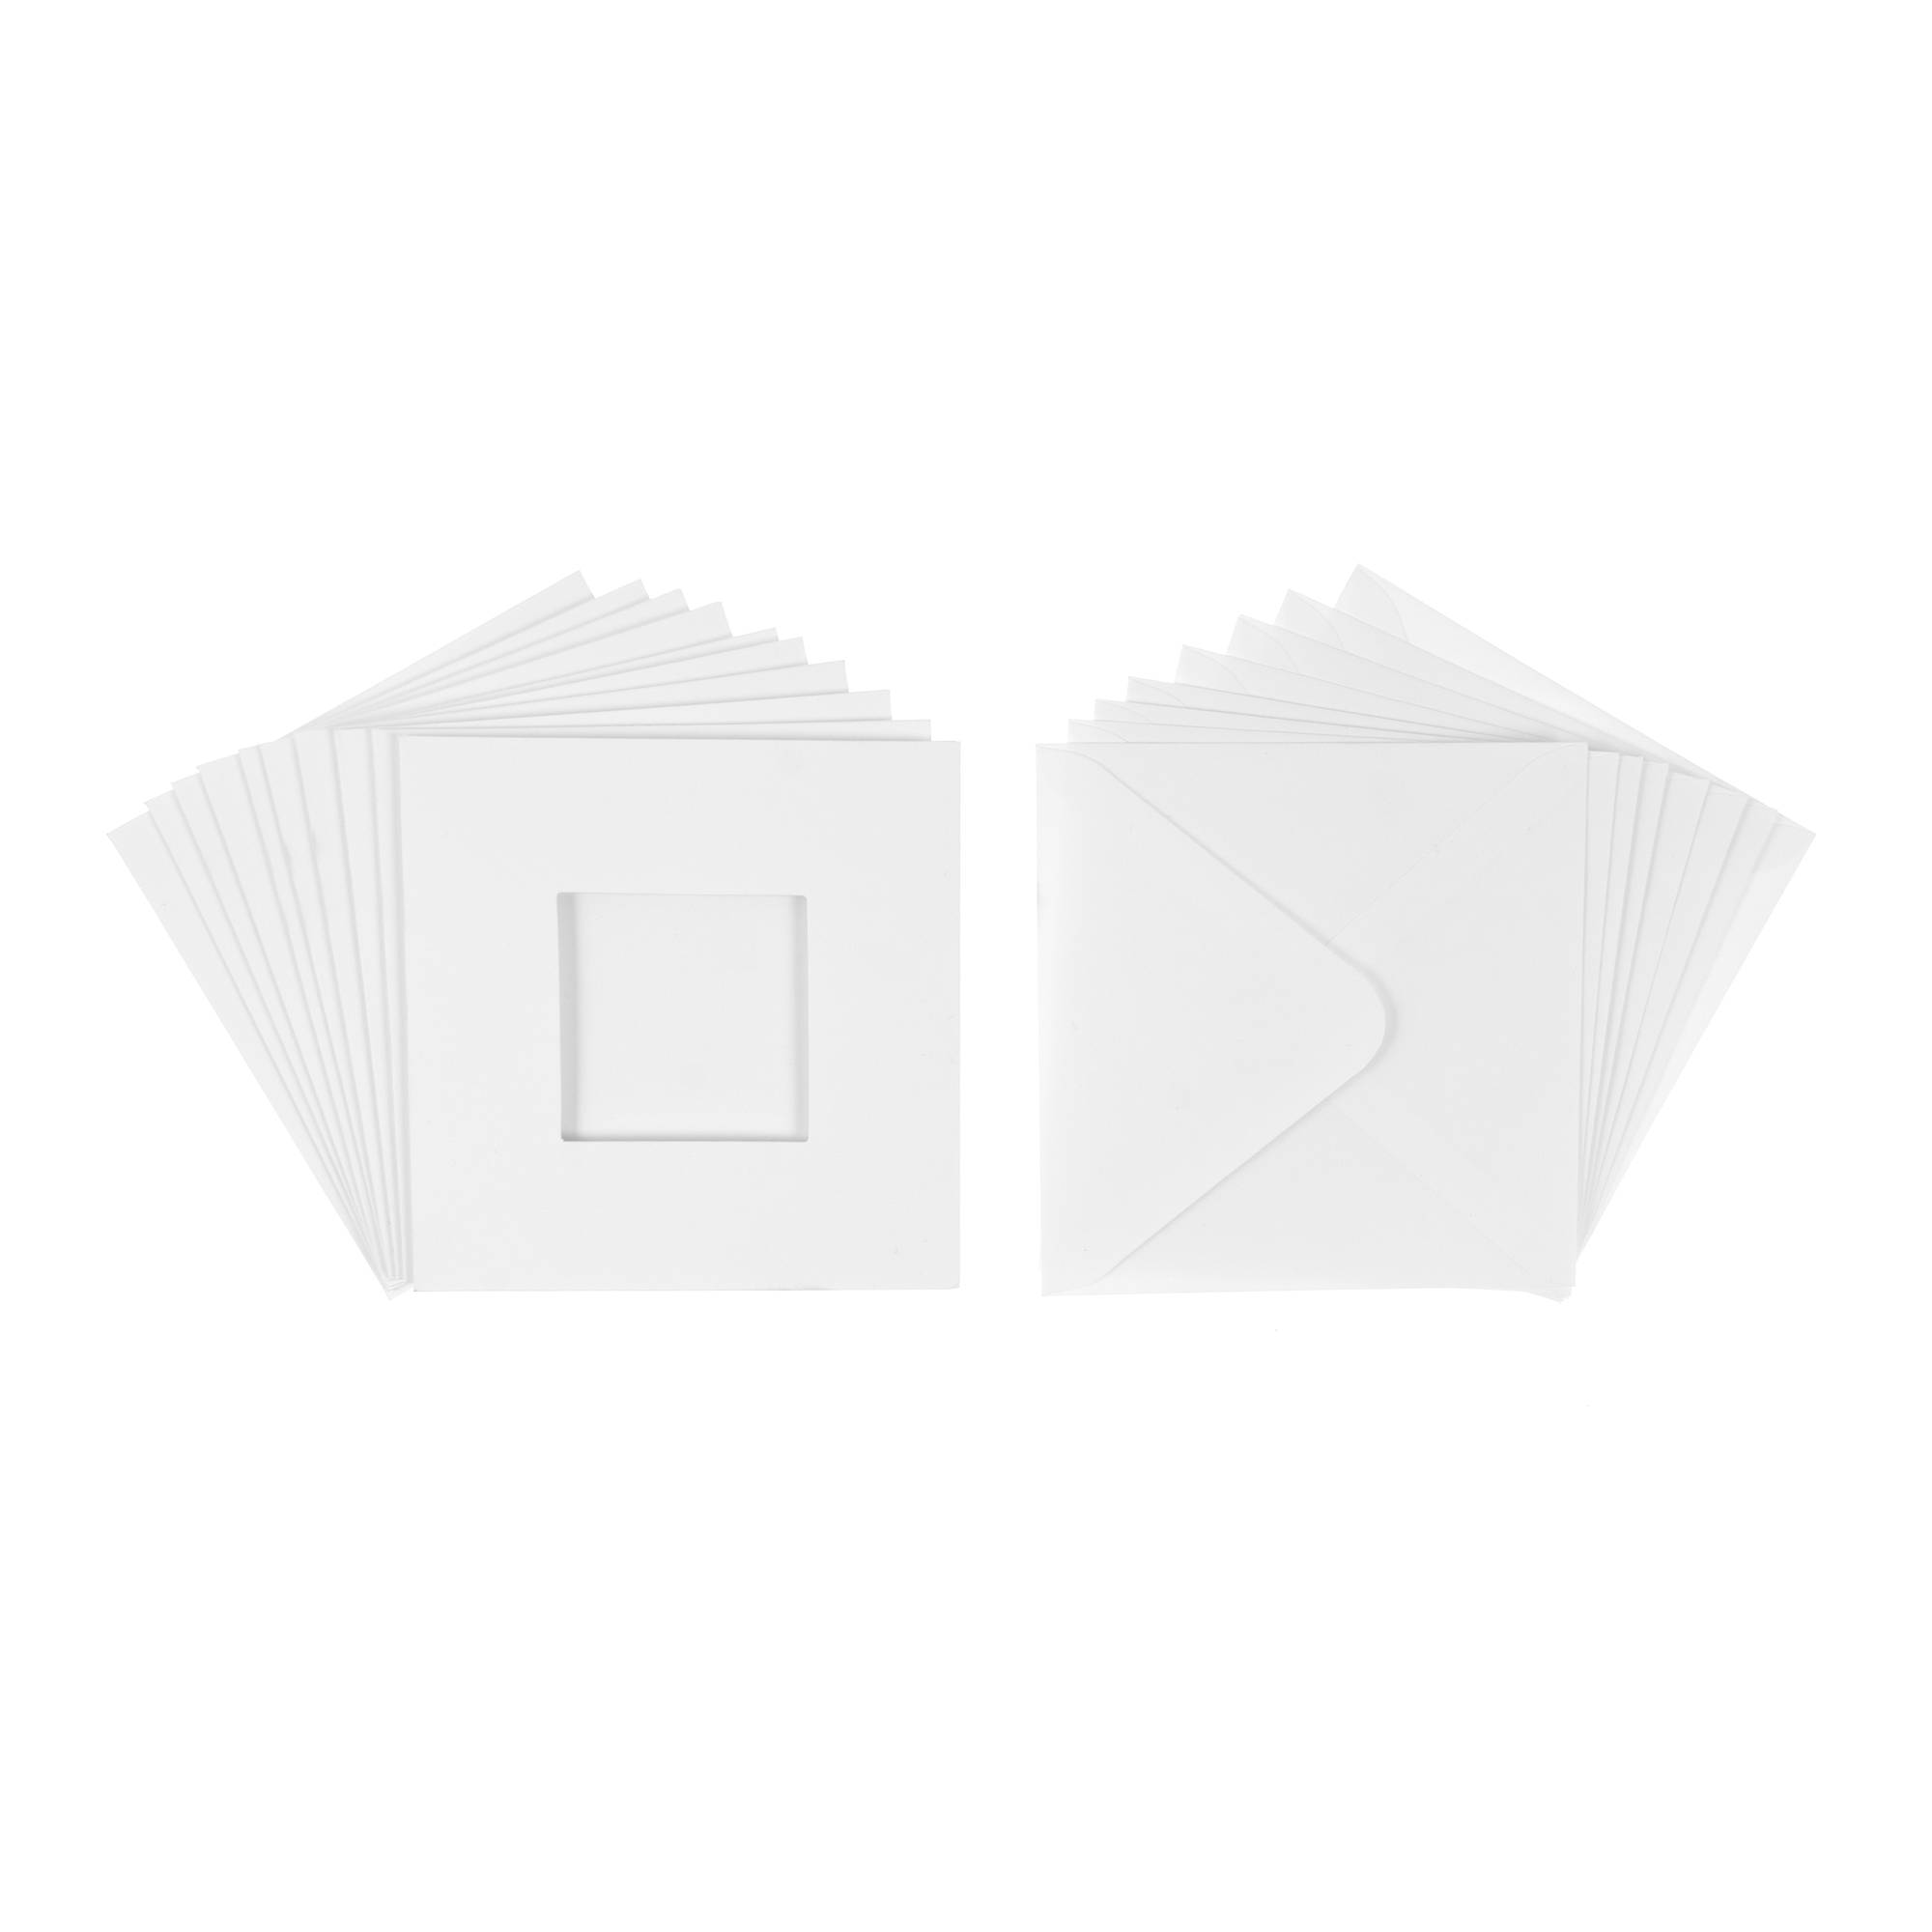 Papermania White Square Aperture Cards and Envelopes 5 x 5 Inches 10 Pack